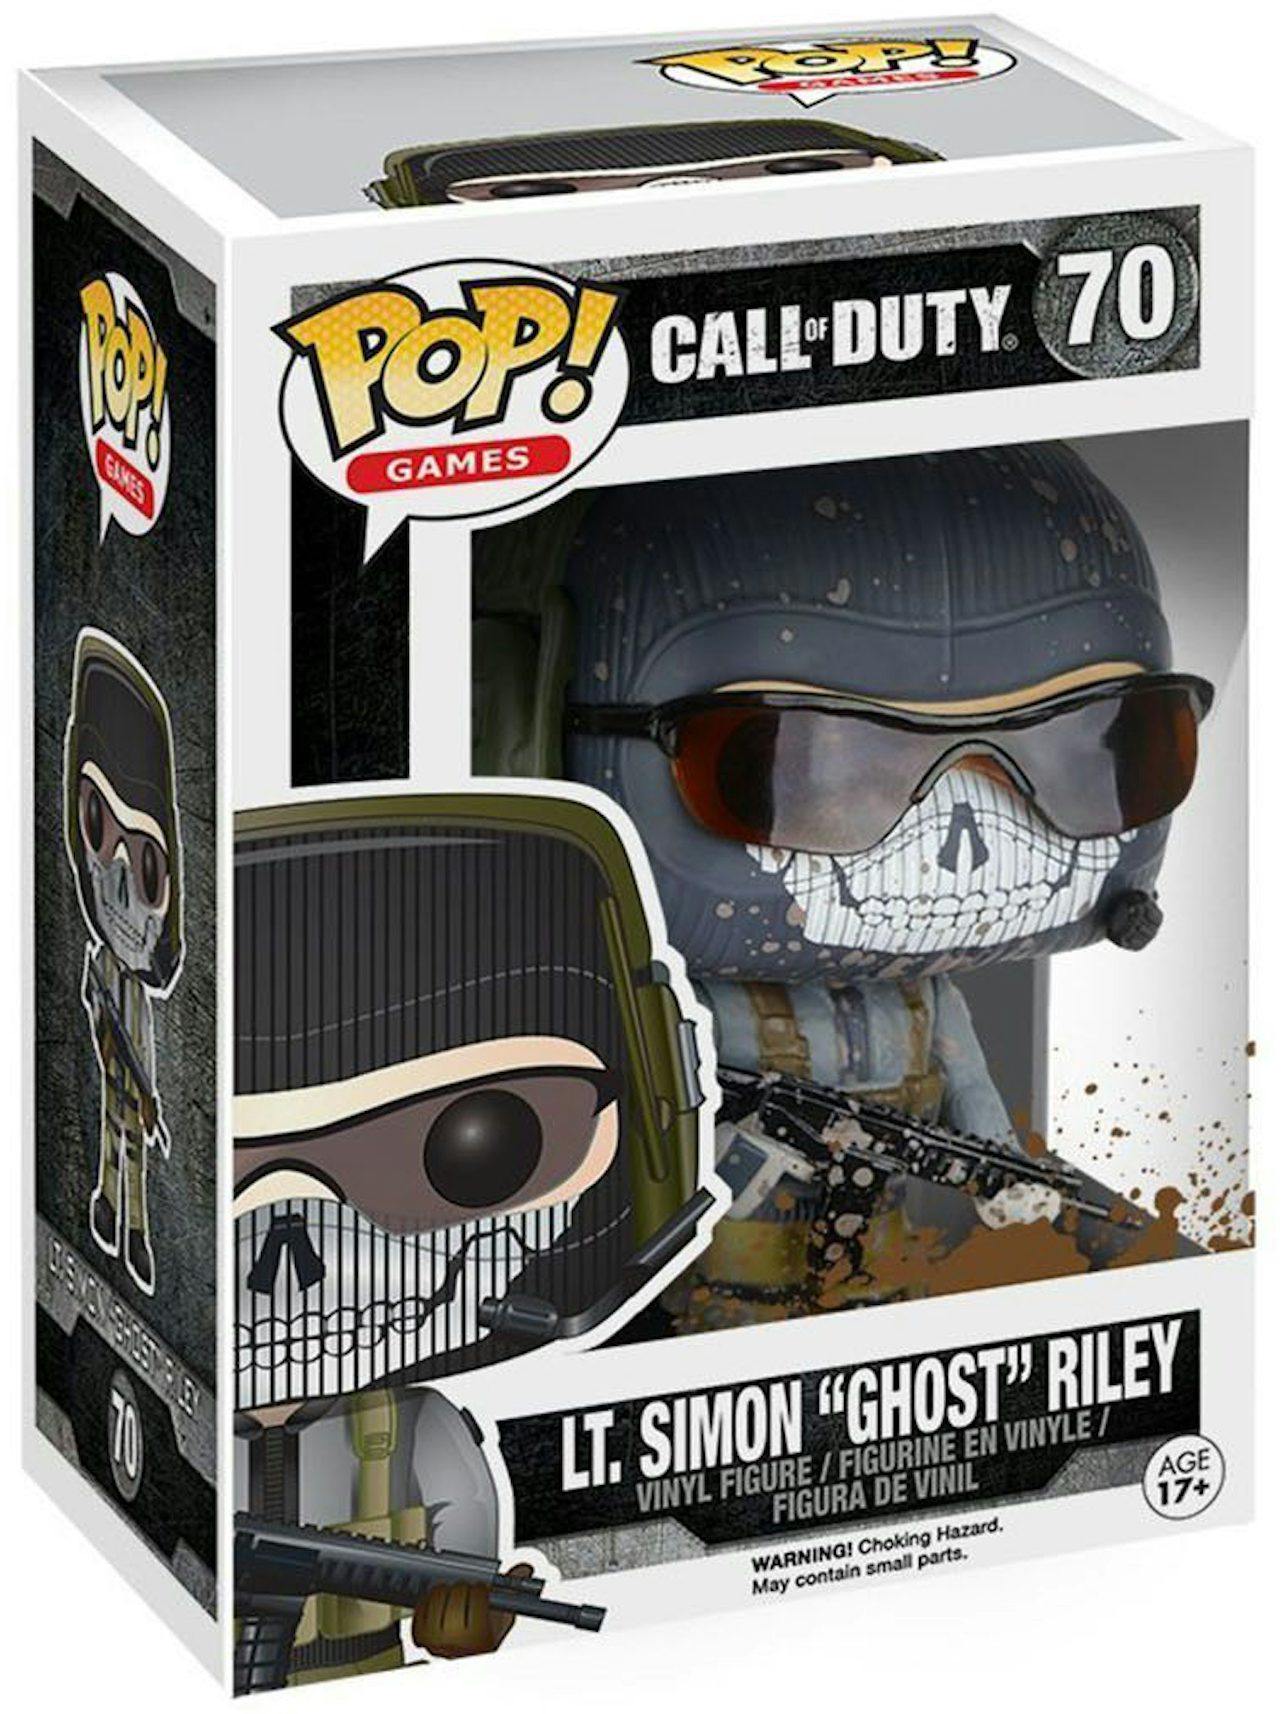 Figurine support Call of duty Lt. Simon Ghost Riley compatible